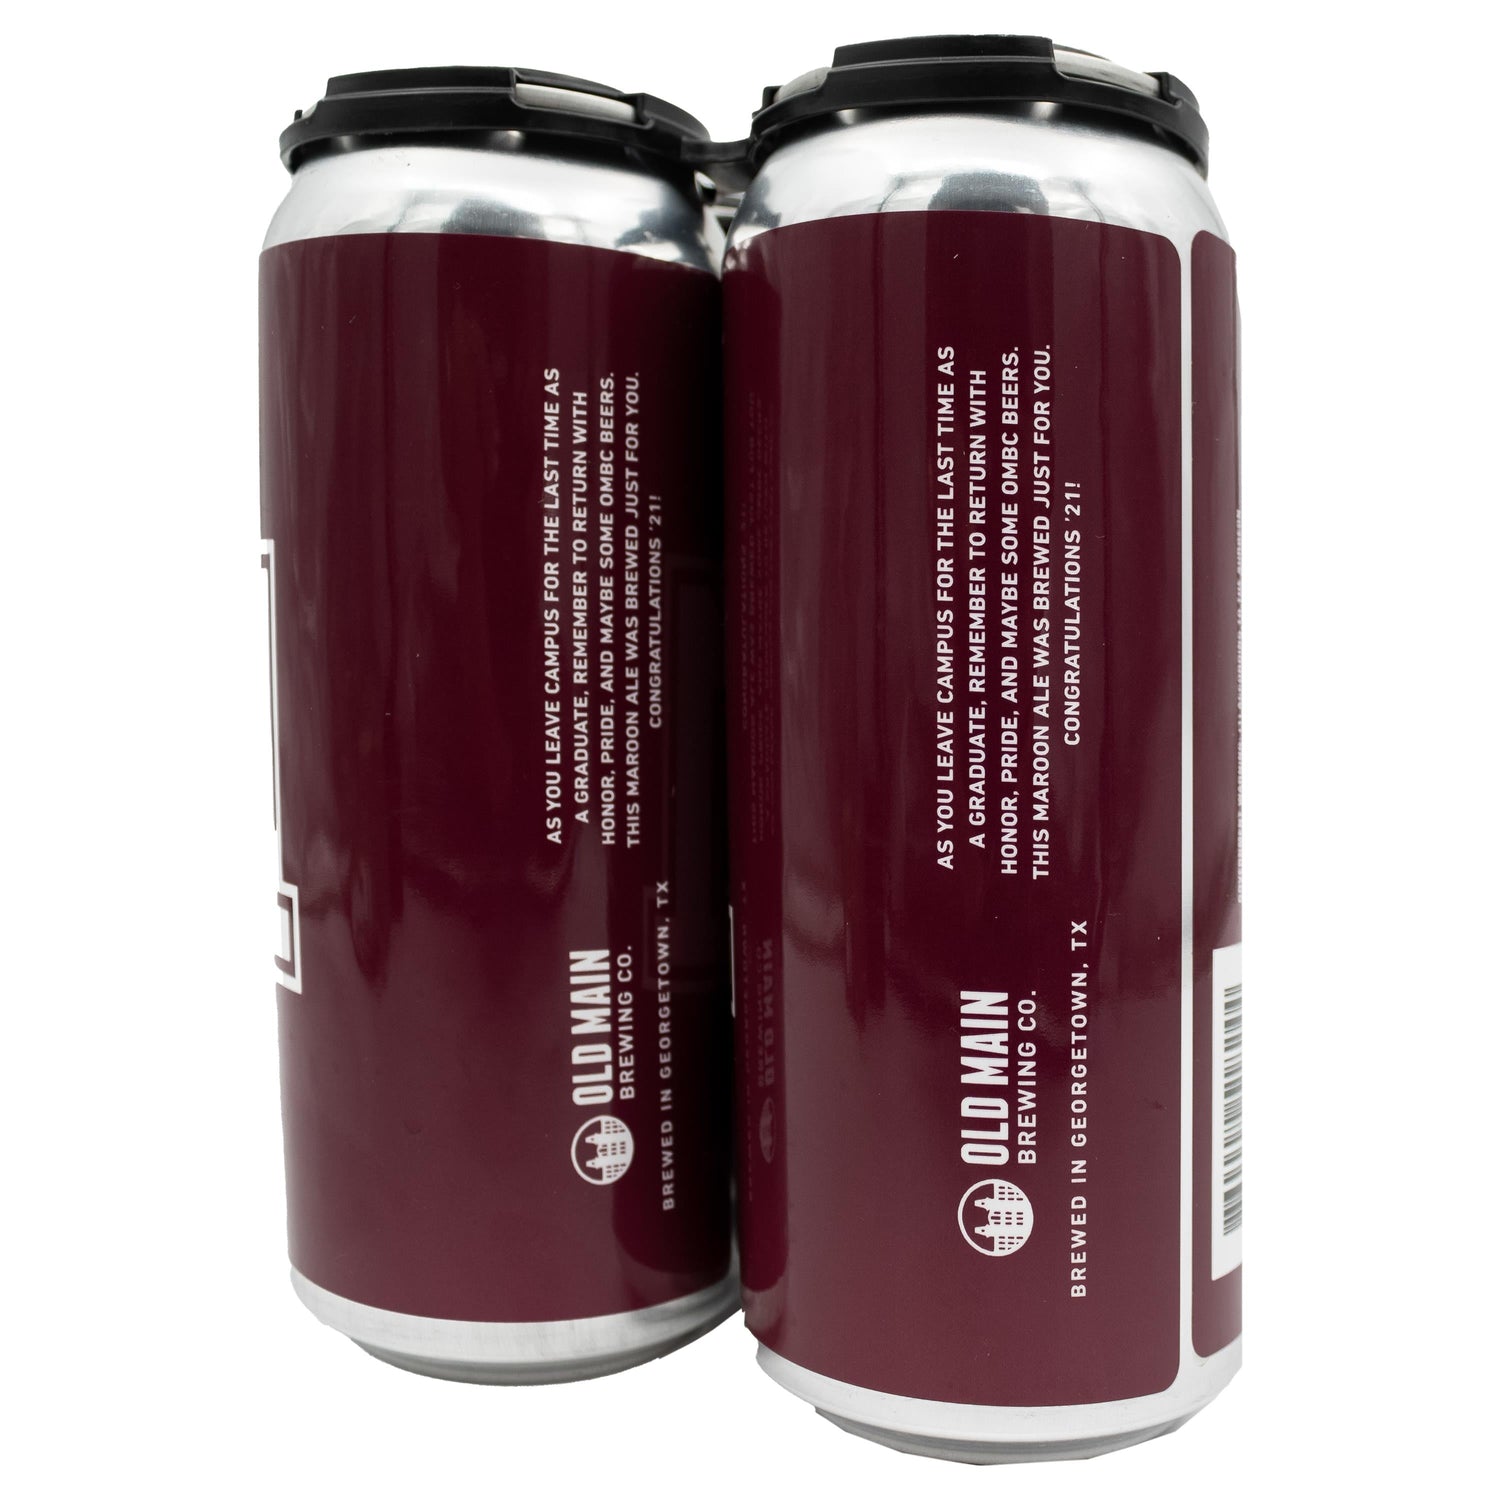 IN STORE PICKUP OR LOCAL DELIVERY ONLY: Old Main '21 Maroon Ale 4 Pack Beer